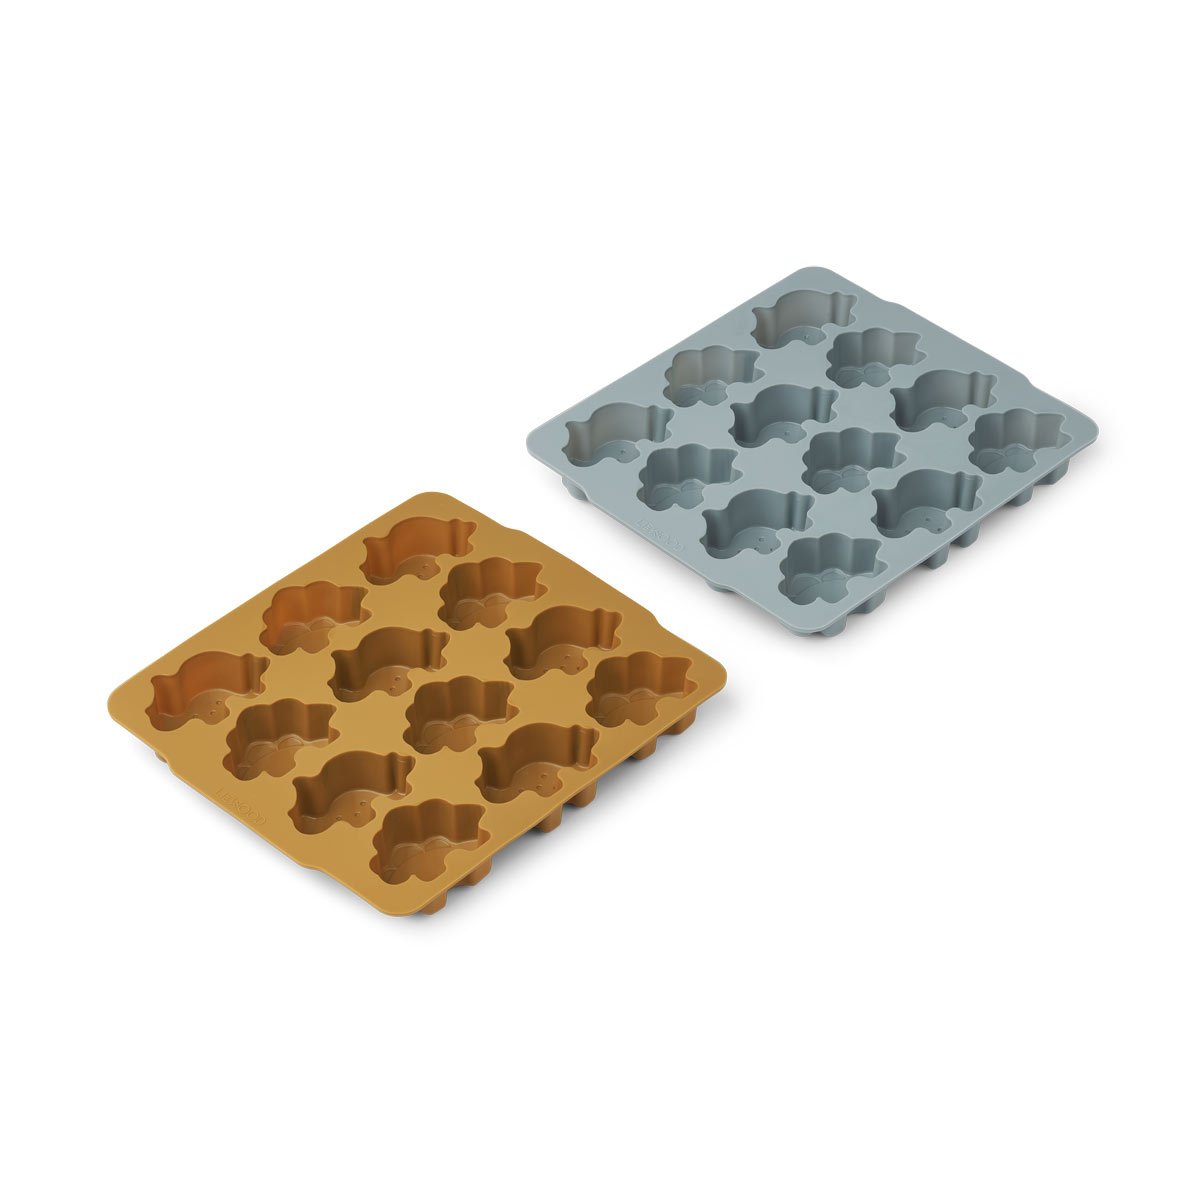 Liewood Sonny Ice Cube Tray - 2 Pack - Dino Golden Caramel/Blue Fog Mix